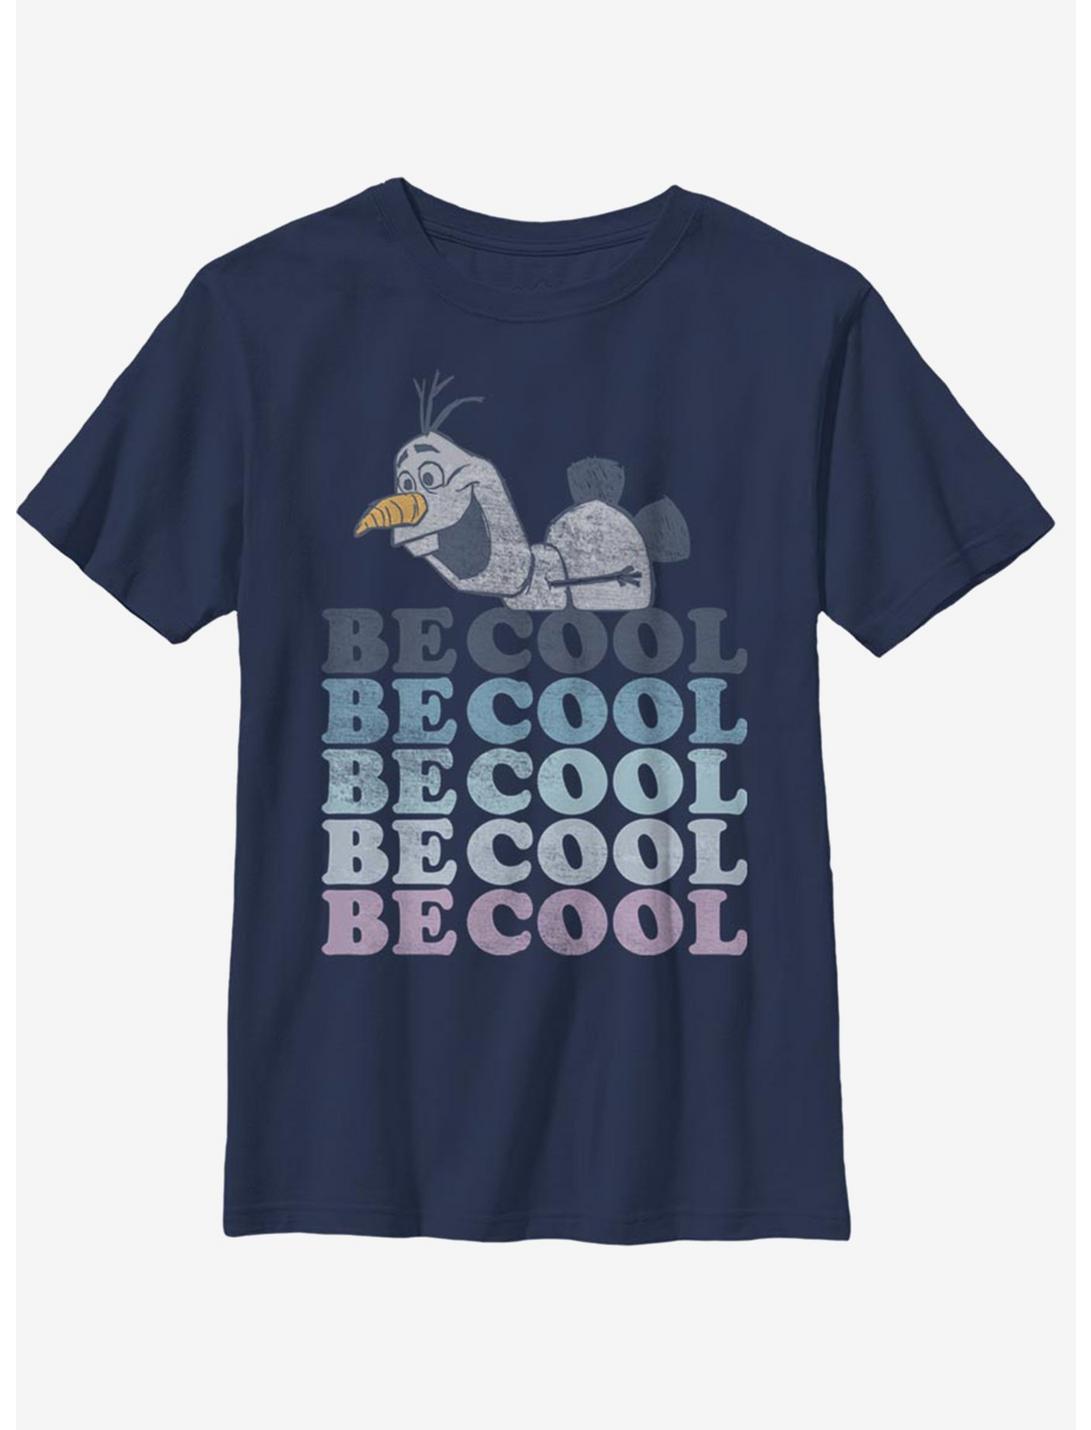 Disney Frozen 2 Olaf Be Cool Youth T-Shirt, NAVY, hi-res